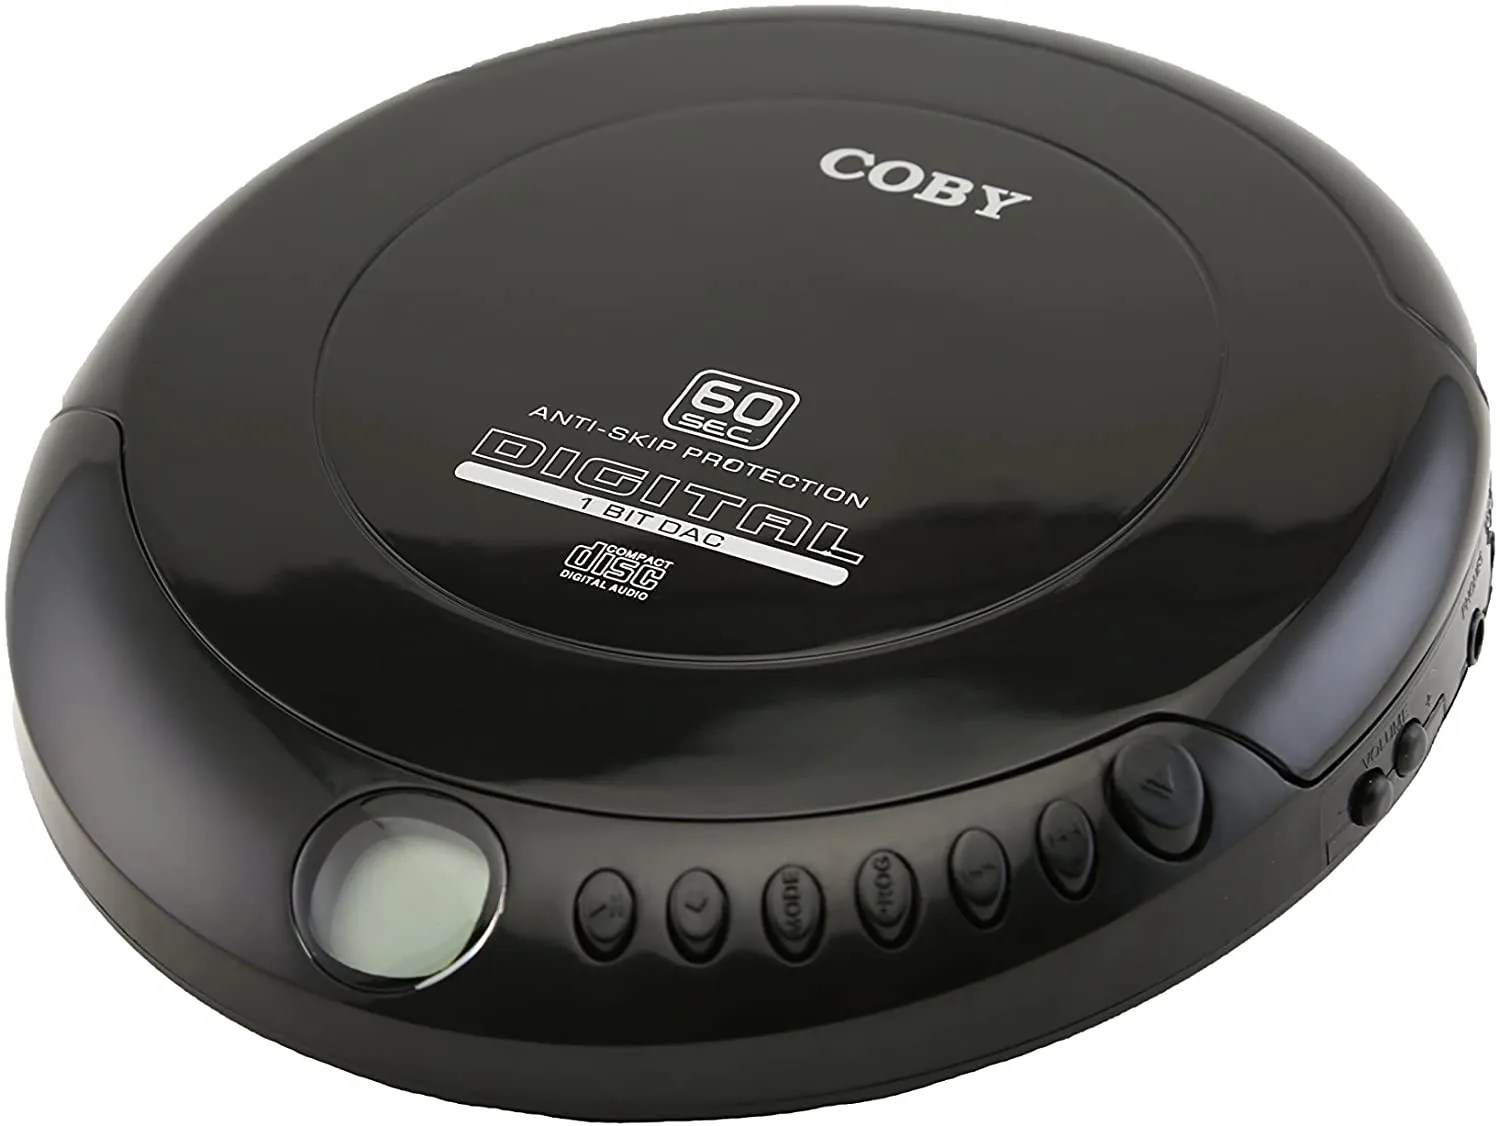 5 Best Portable CD Players You Can Buy In 2022